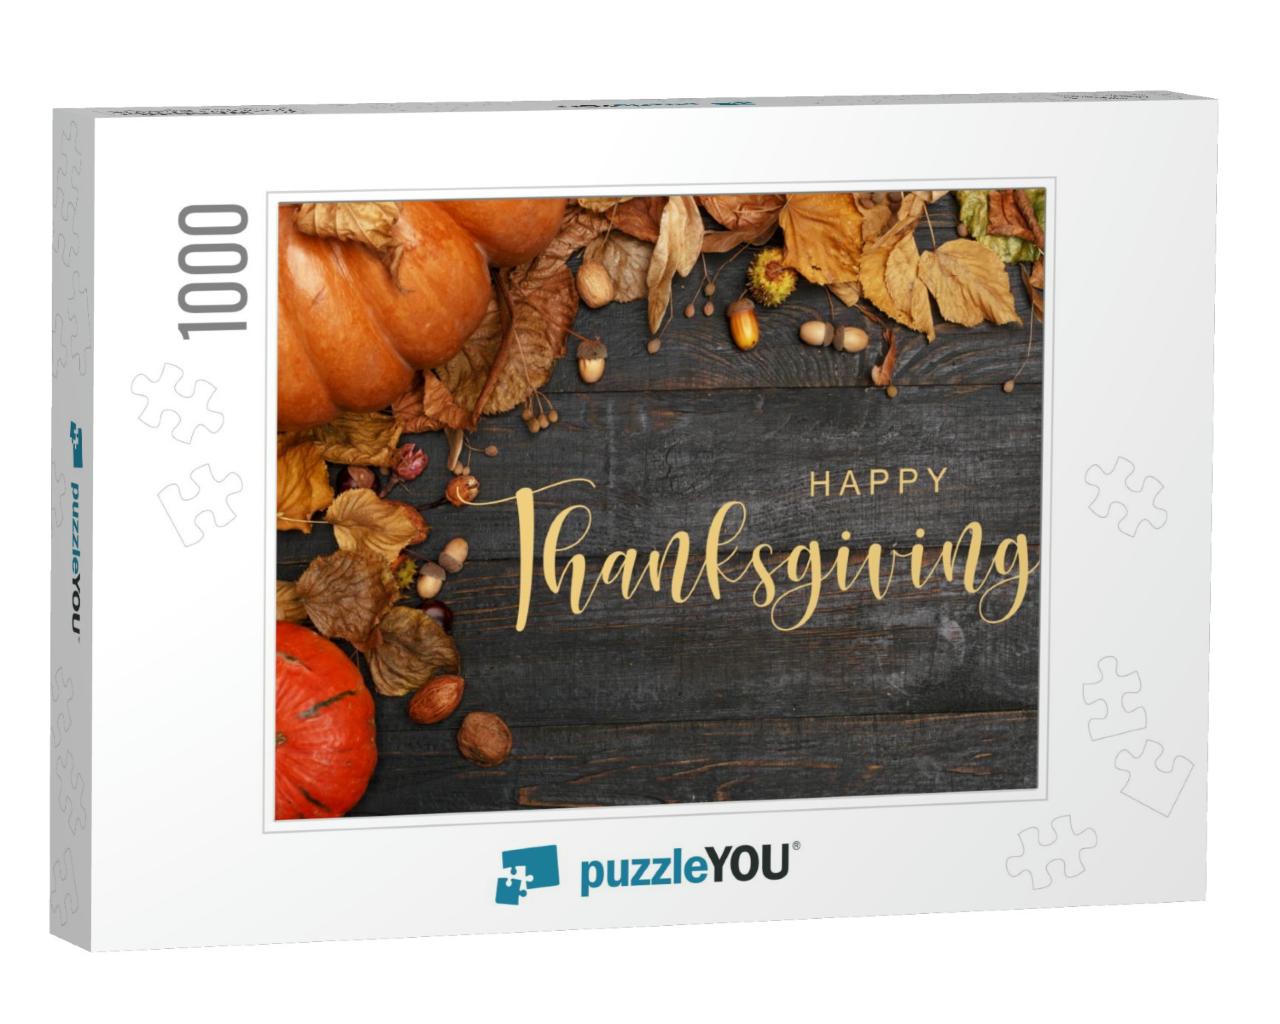 Thanksgiving Greetings. Pumpkins & Dry Leaves on a Dark W... Jigsaw Puzzle with 1000 pieces